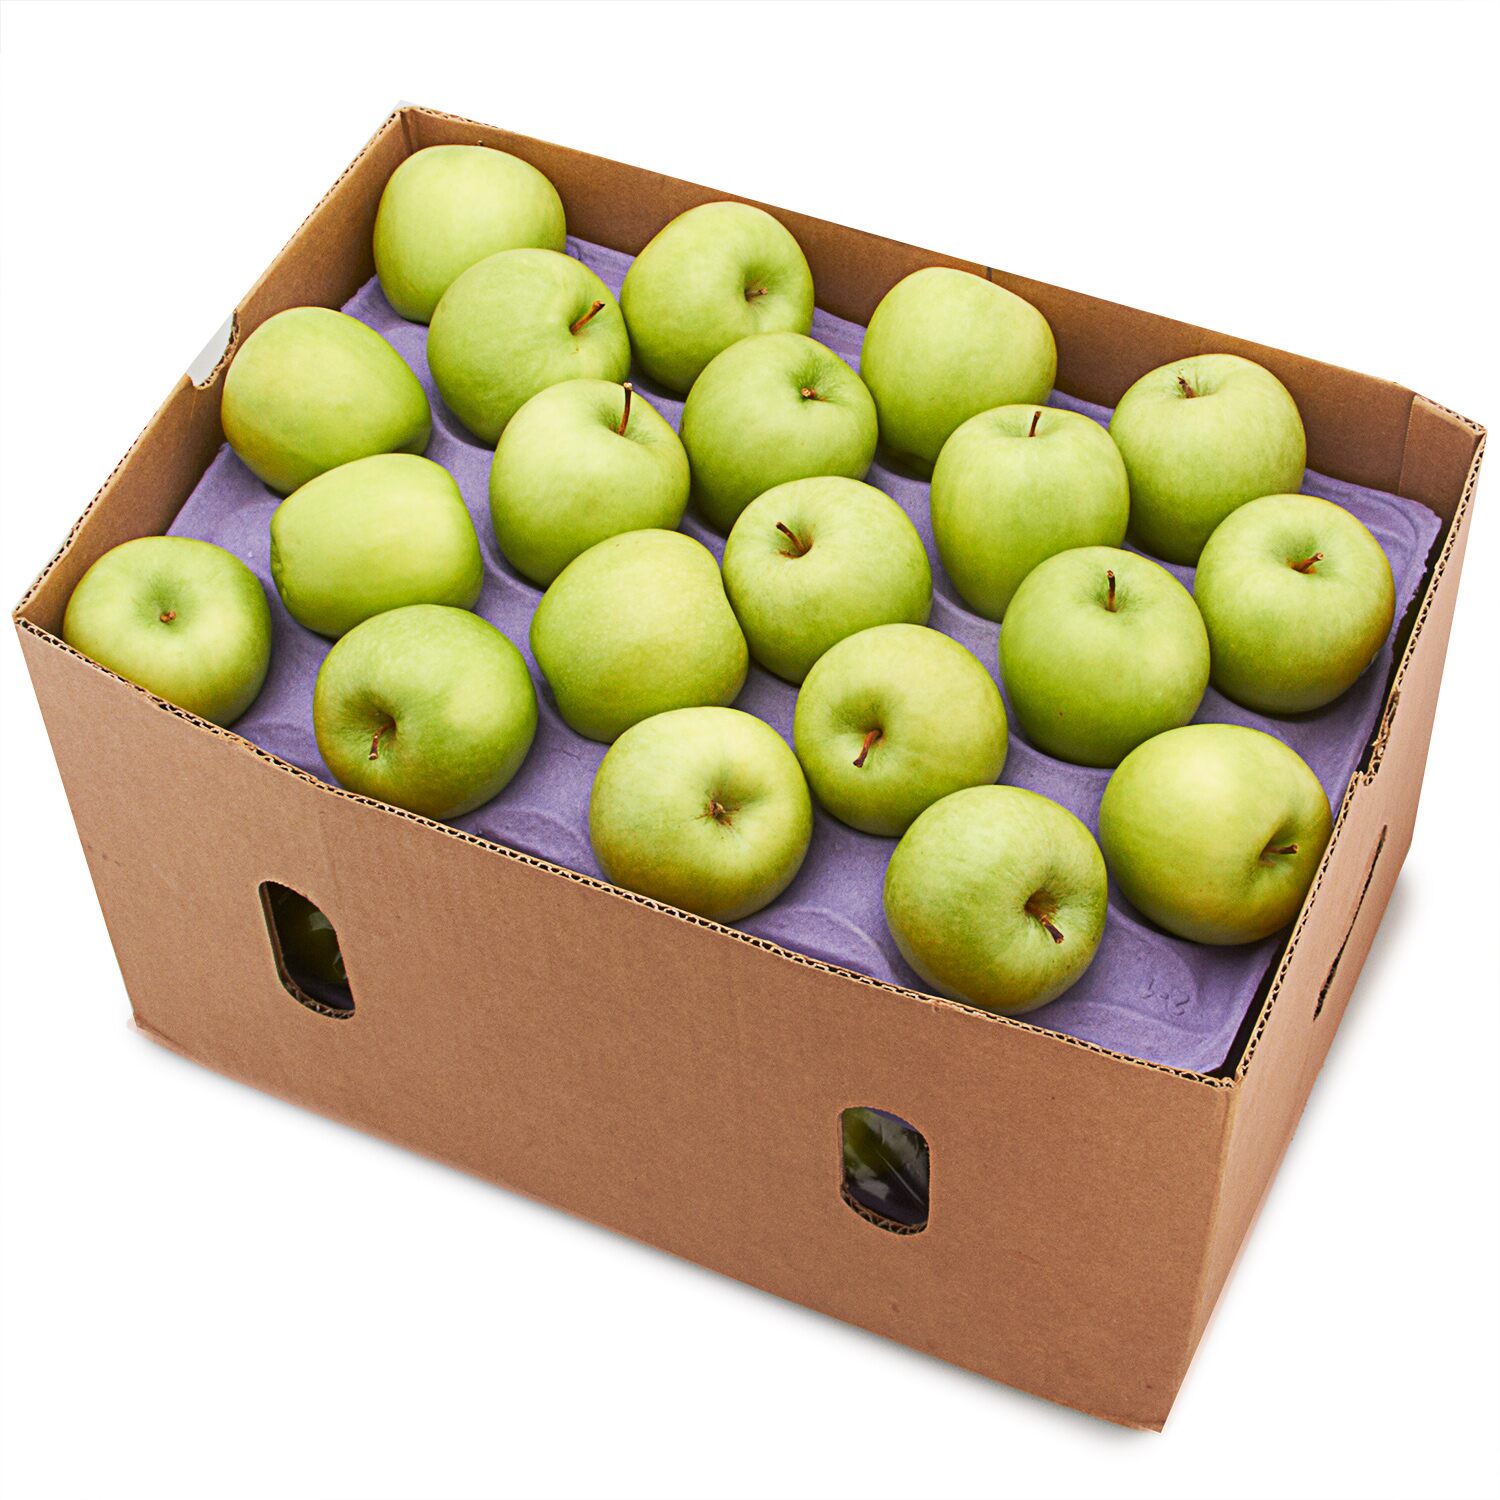 How To Store Granny Smith Apples